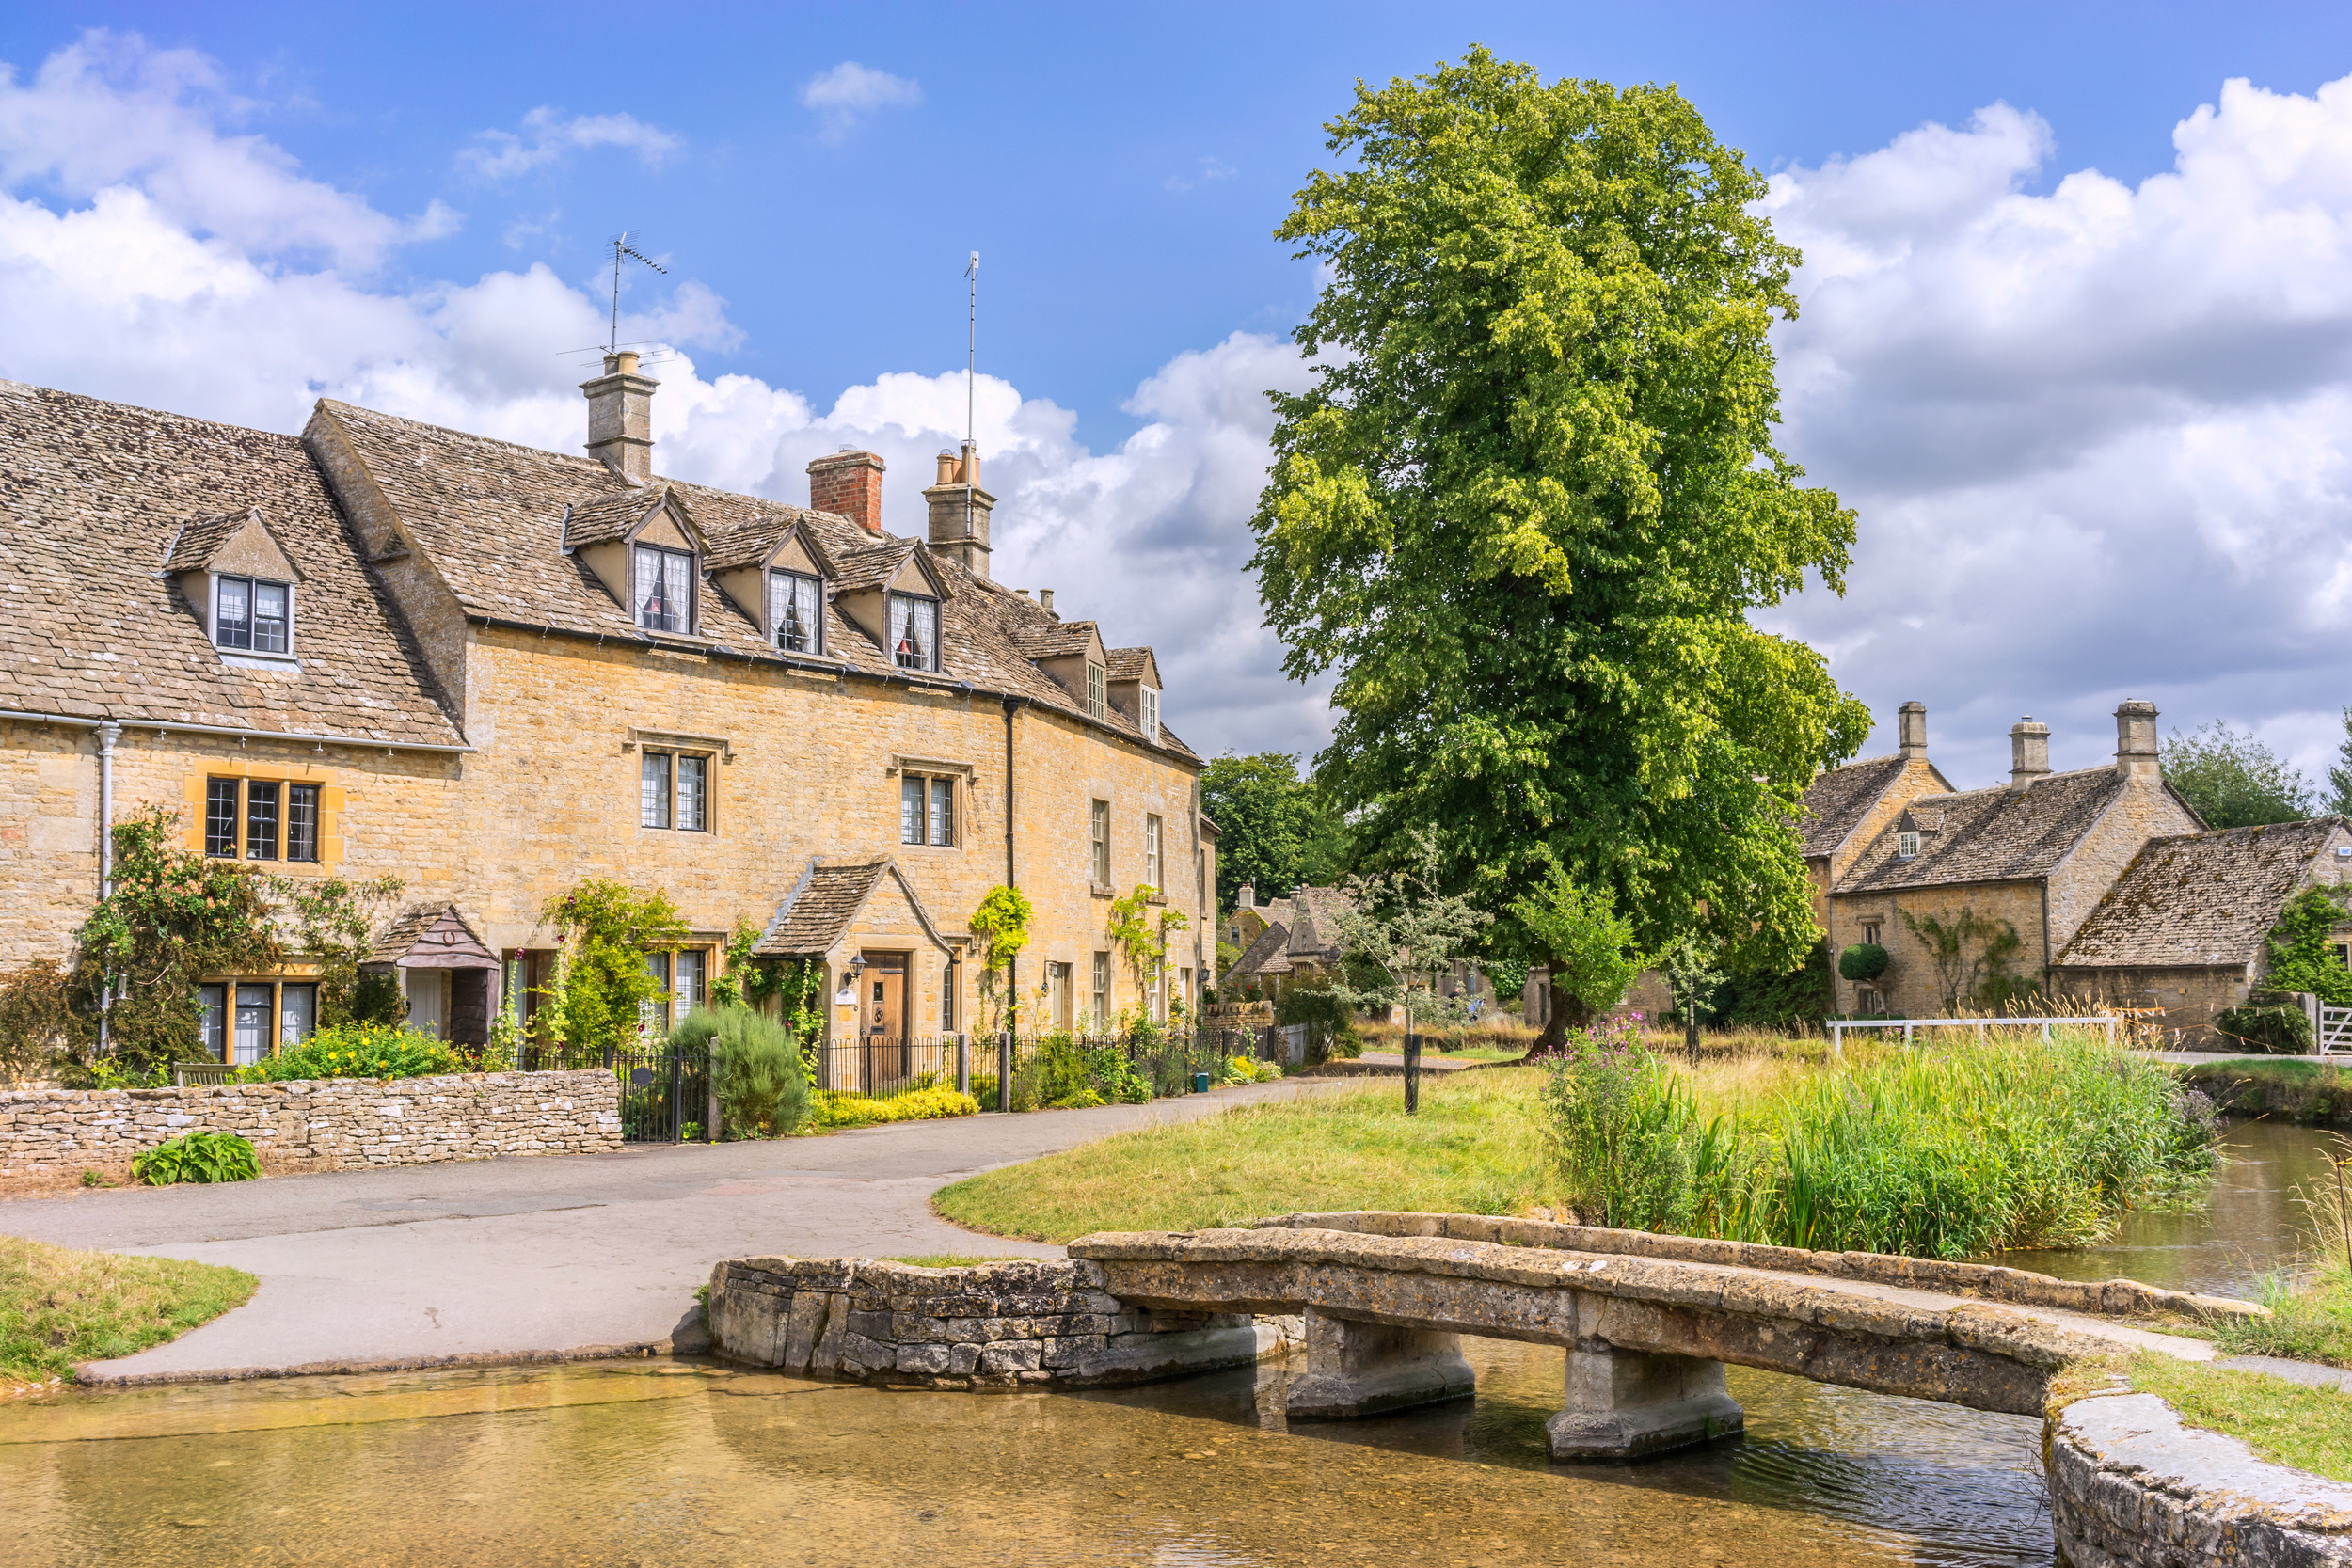 <p>If one region on this list is known for walking, it’s the Cotswolds. Well-trodden walking paths connect the numerous villages in the west of England. You can choose a single base and enjoy walking the English countryside to different adorable towns!</p><p>You may also like: <a href='https://www.yardbarker.com/lifestyle/articles/these_20_vegetables_are_best_eaten_in_spring/s1__40253251'>These 20 vegetables are best eaten in spring</a></p>